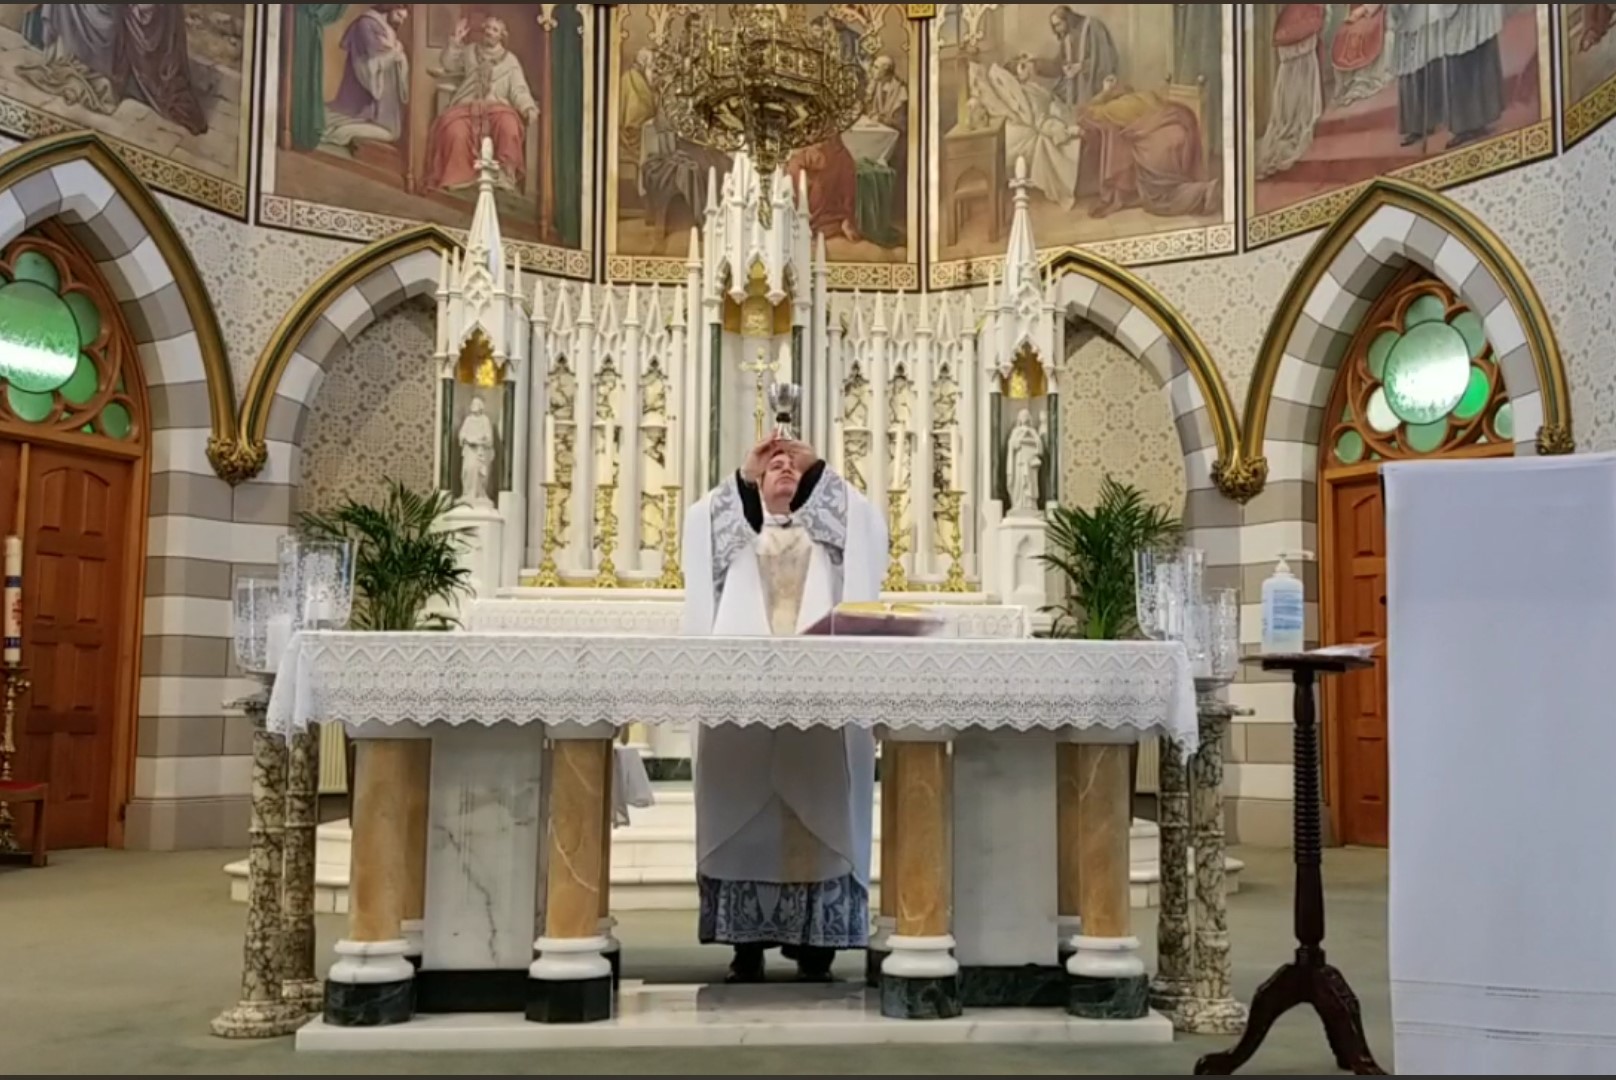 Fr. Willyans raising the chalice at mass